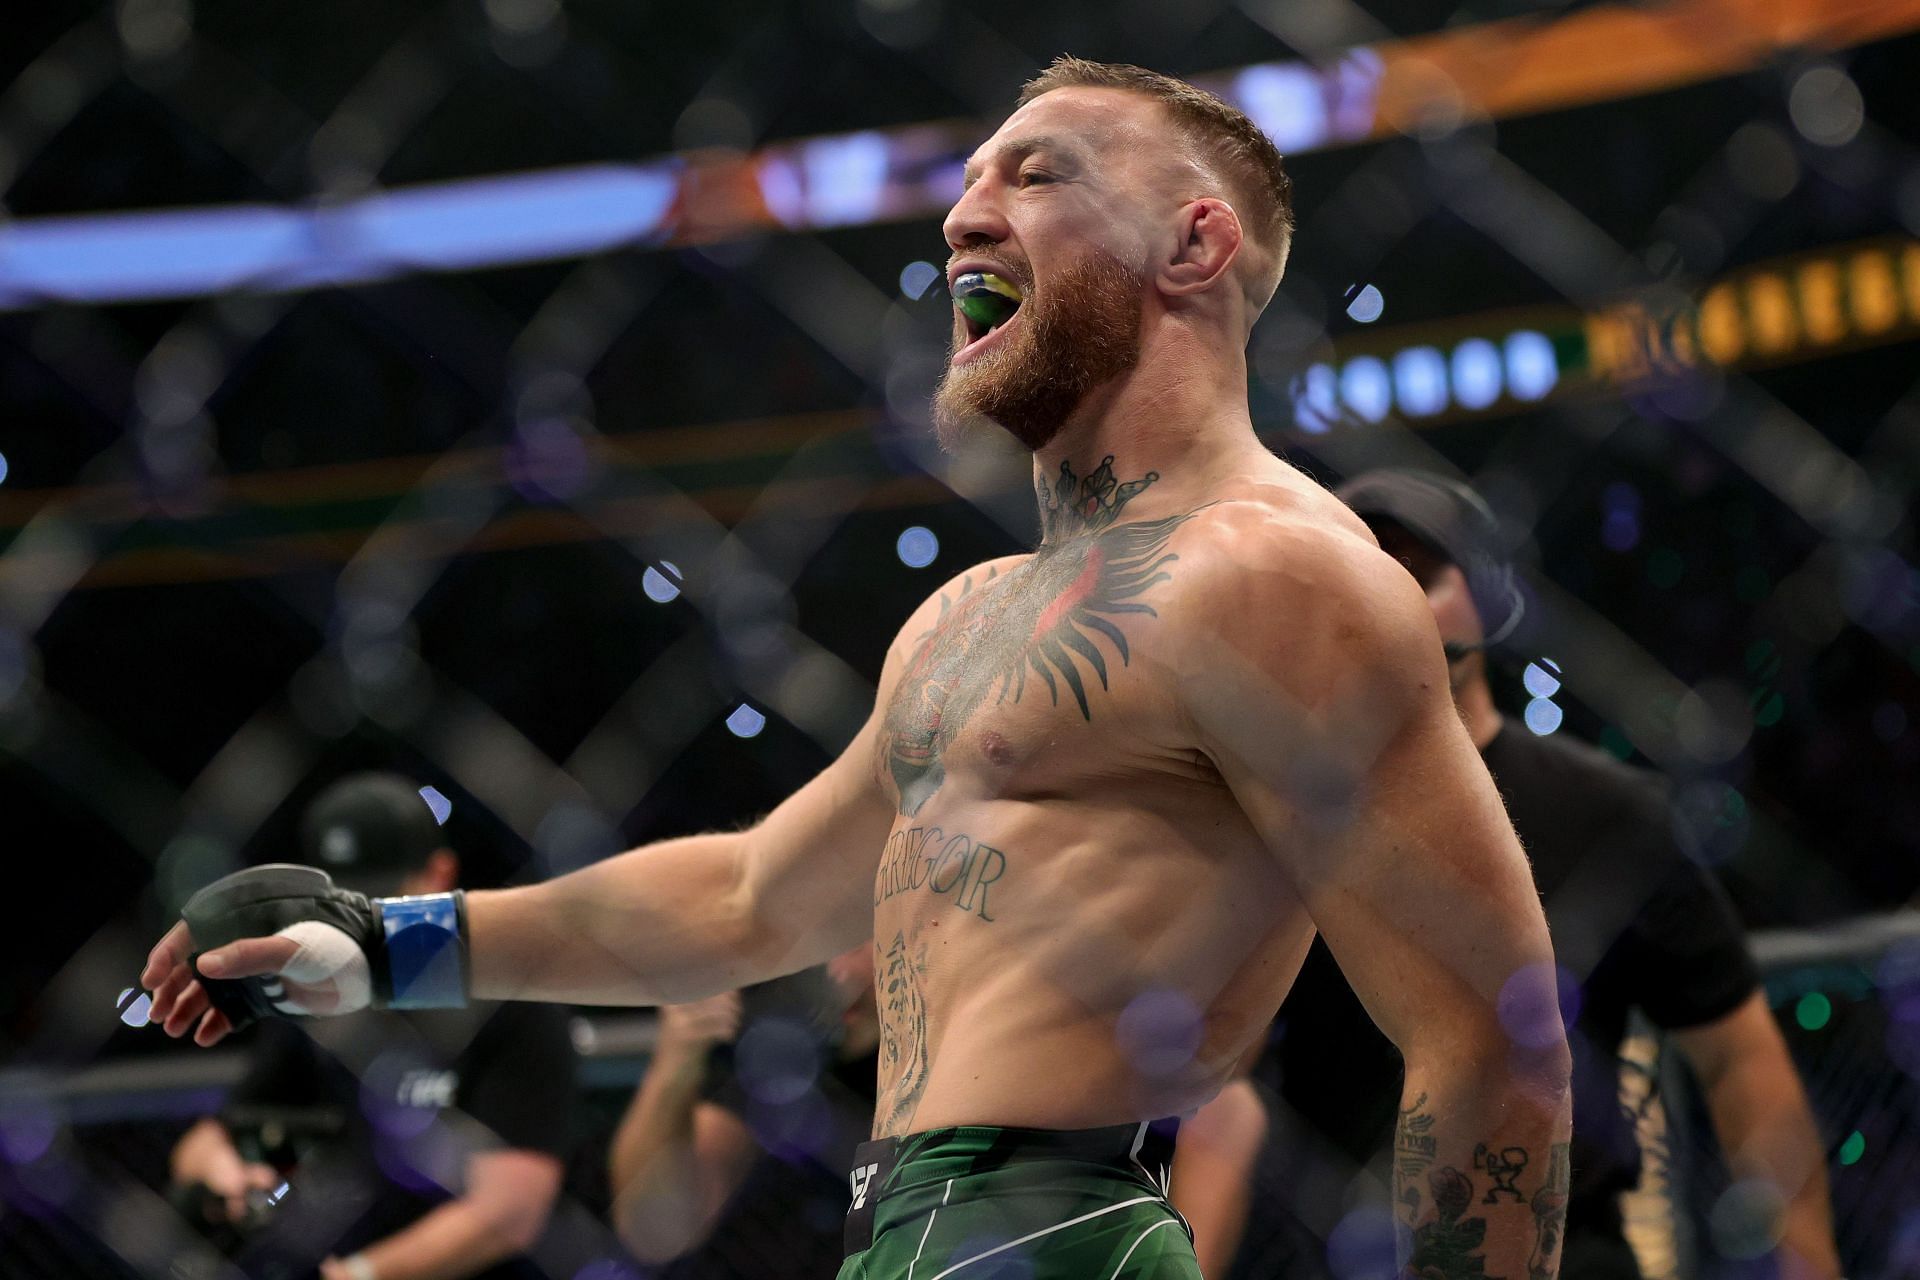 Conor McGregor has helped the UFC grow massively since he became a superstar under their wing